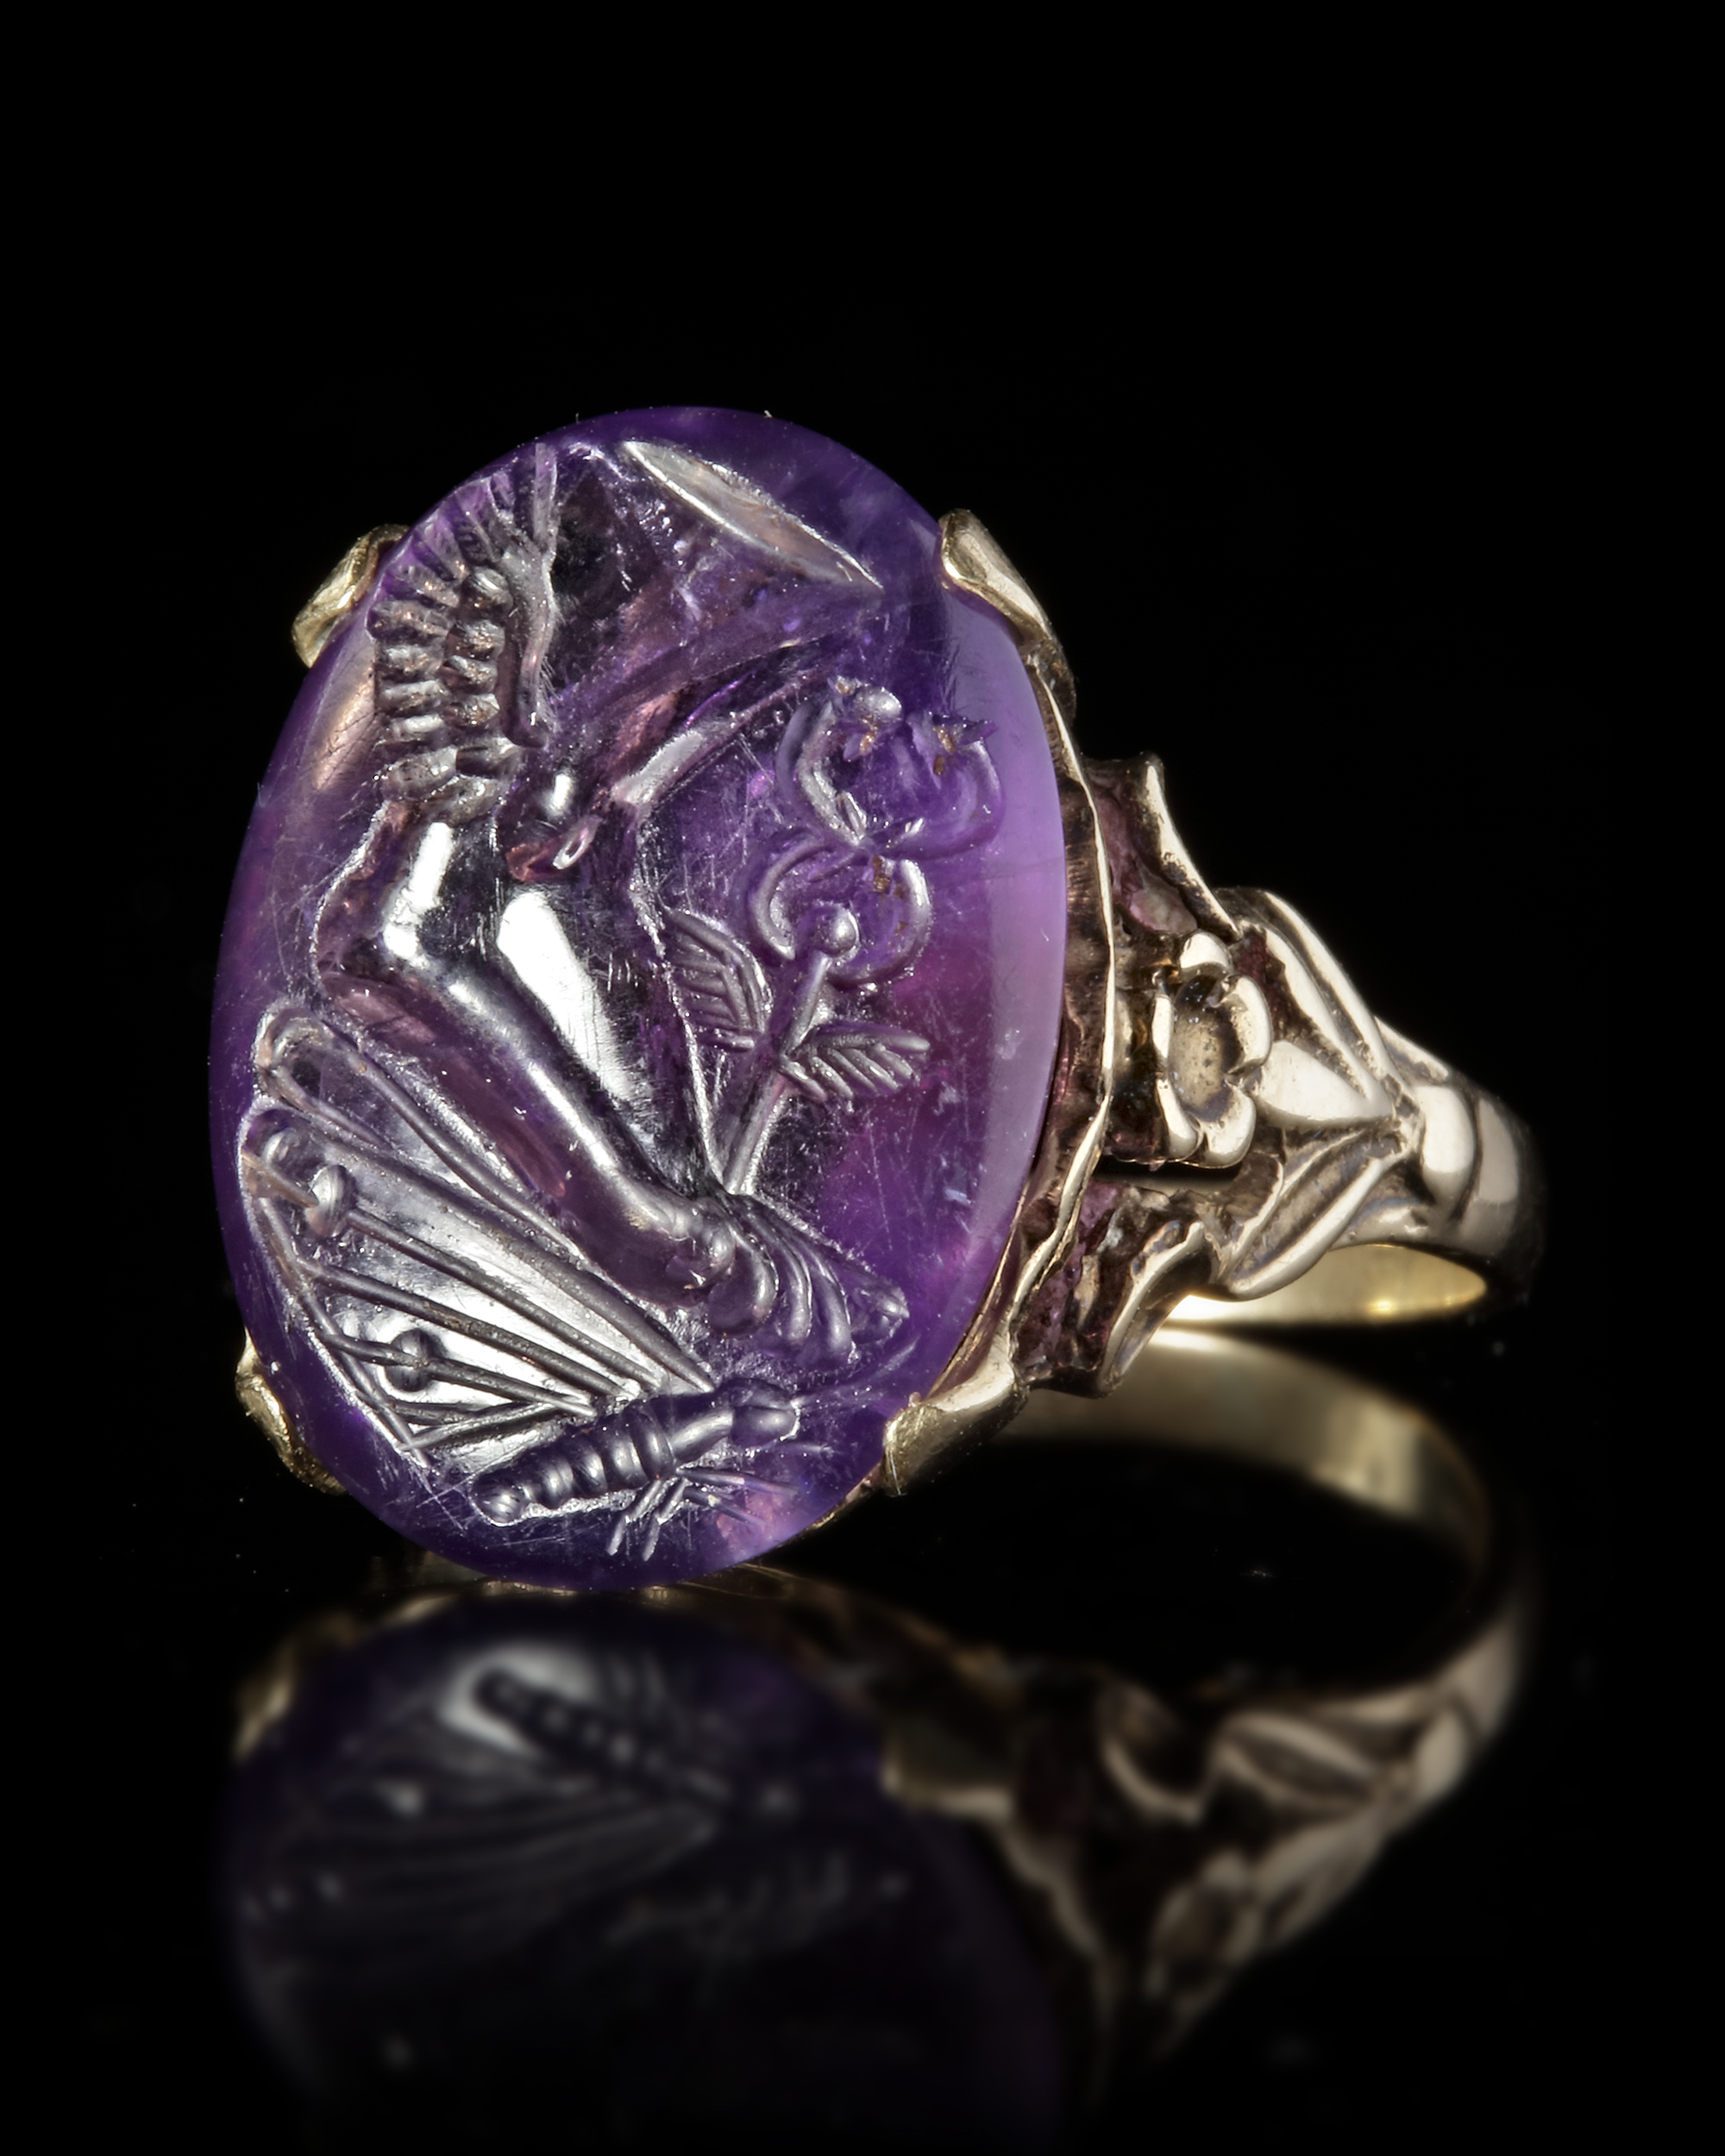 A ROMAN INTAGLIO IN AMETHYST WITH A FOOT OF MERCURY AND BUTTERFLY MOUNTED IN A 19TH CENTURY RING, IN